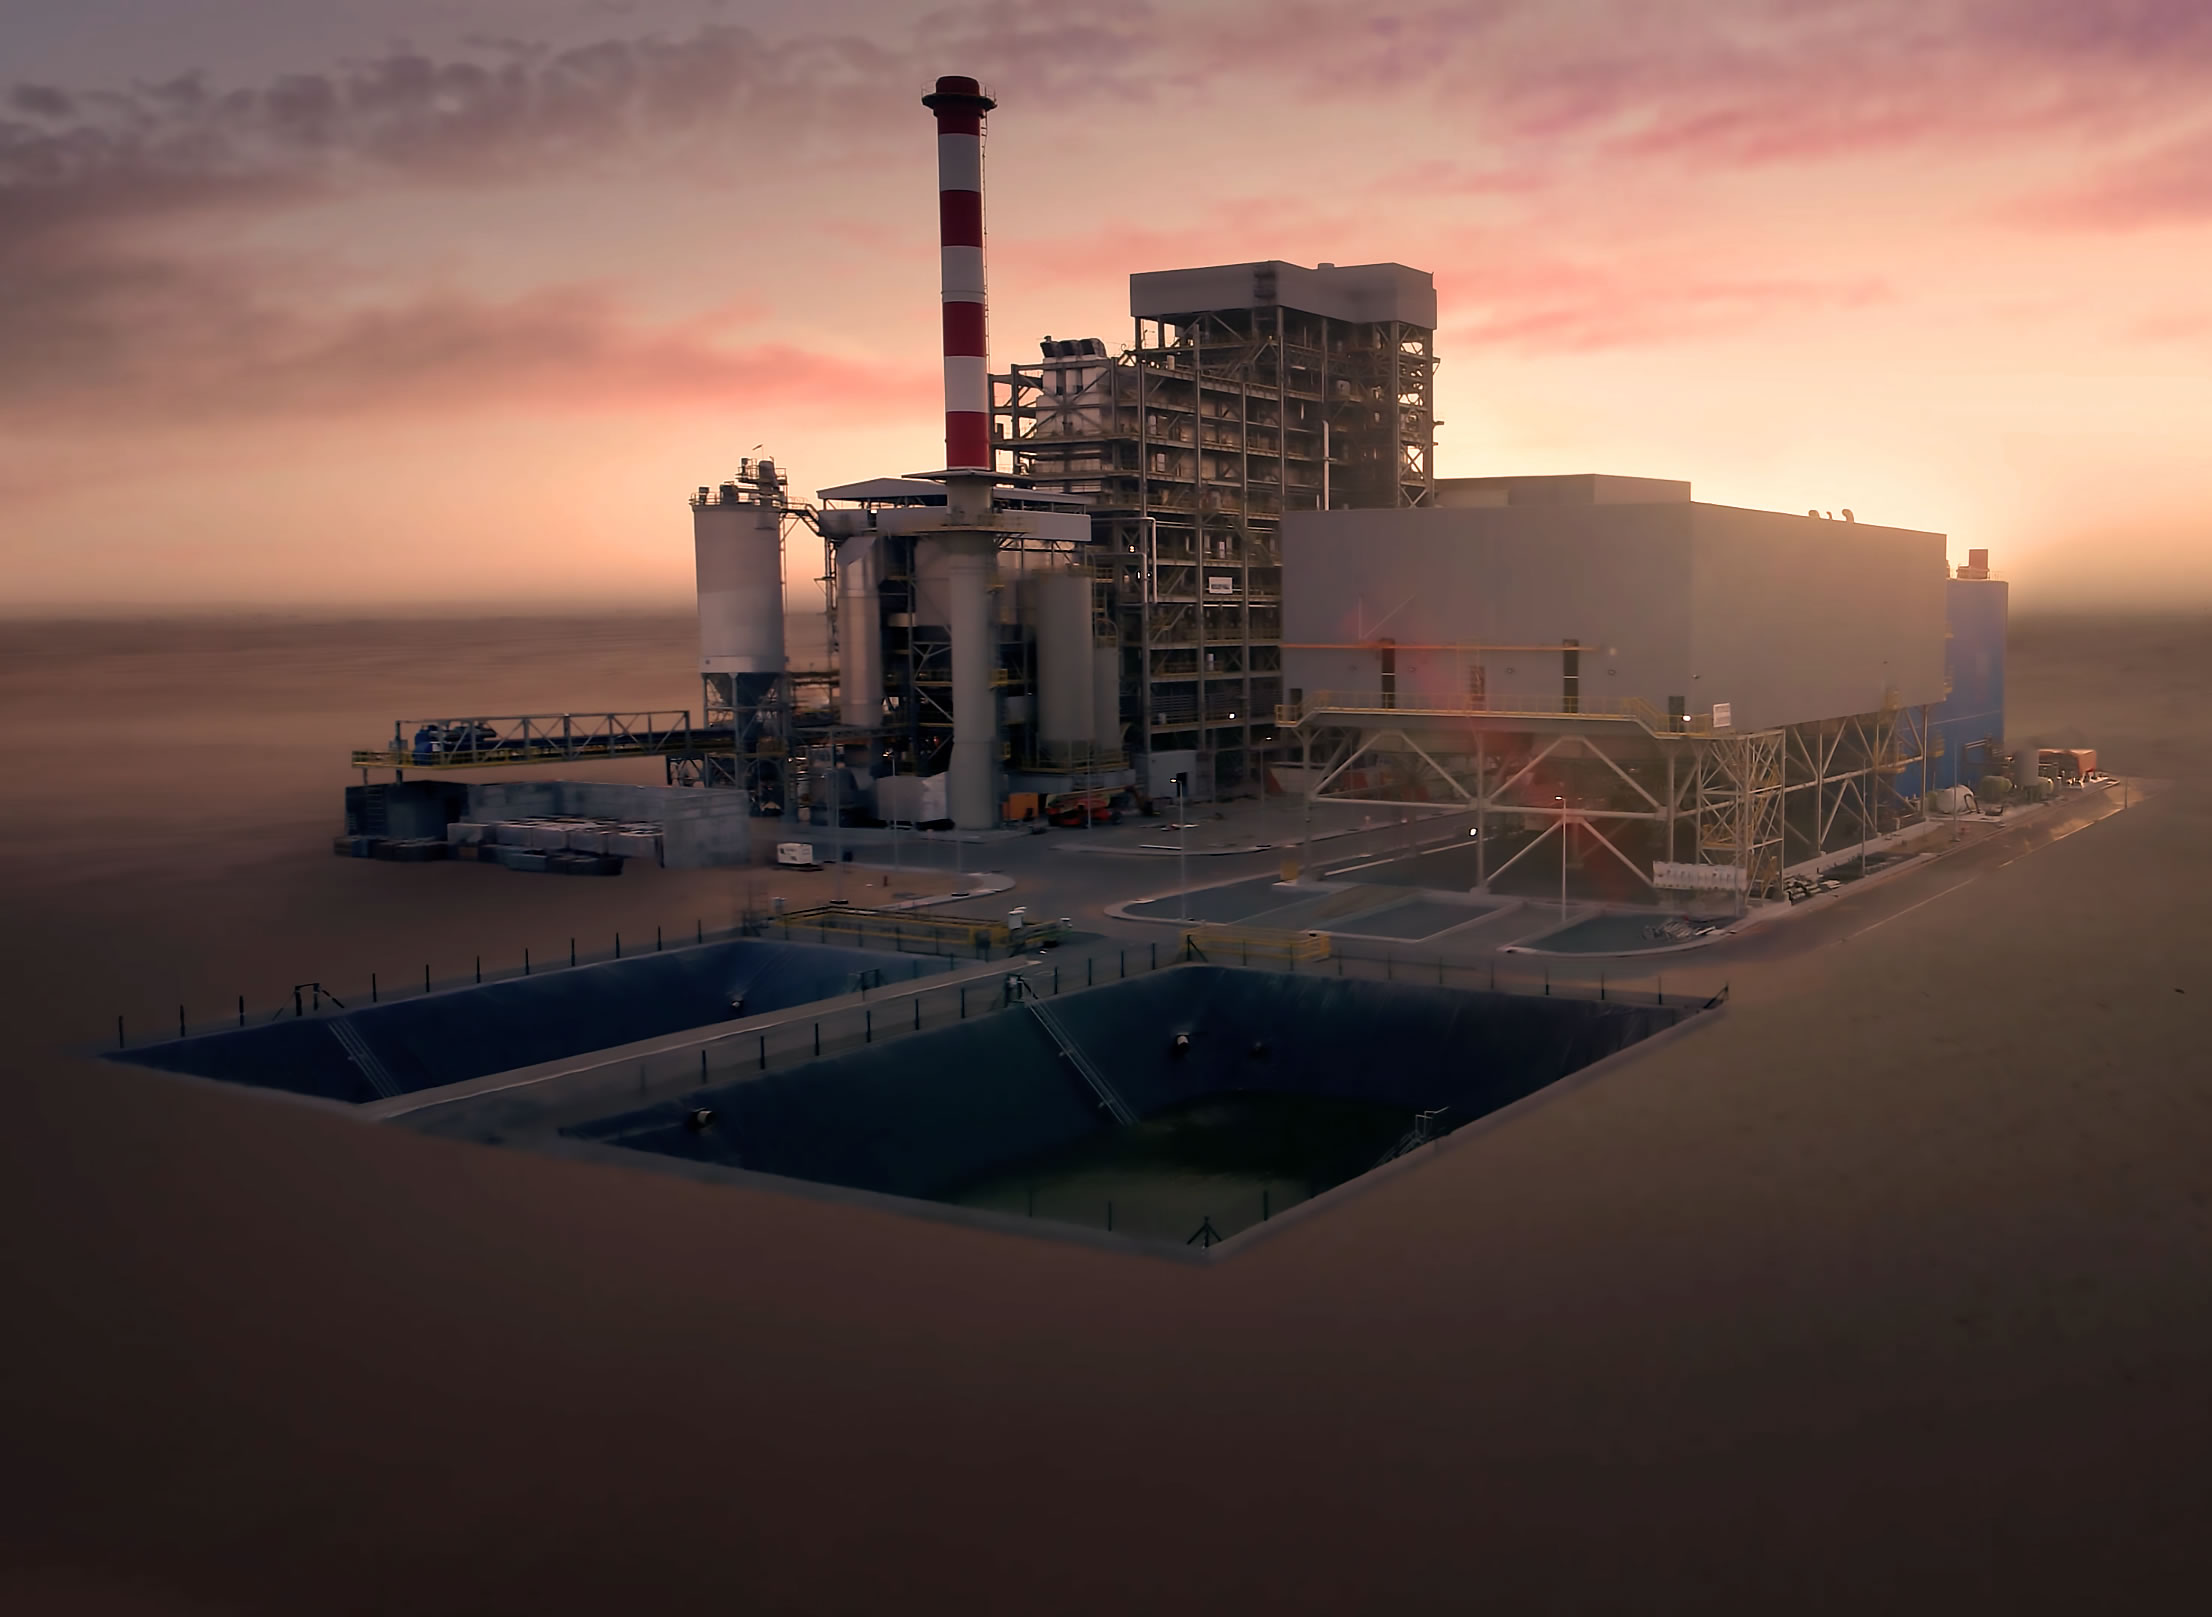 The Sharjah Waste to Energy plant, a first-of-its-kind project in the Middle East, 